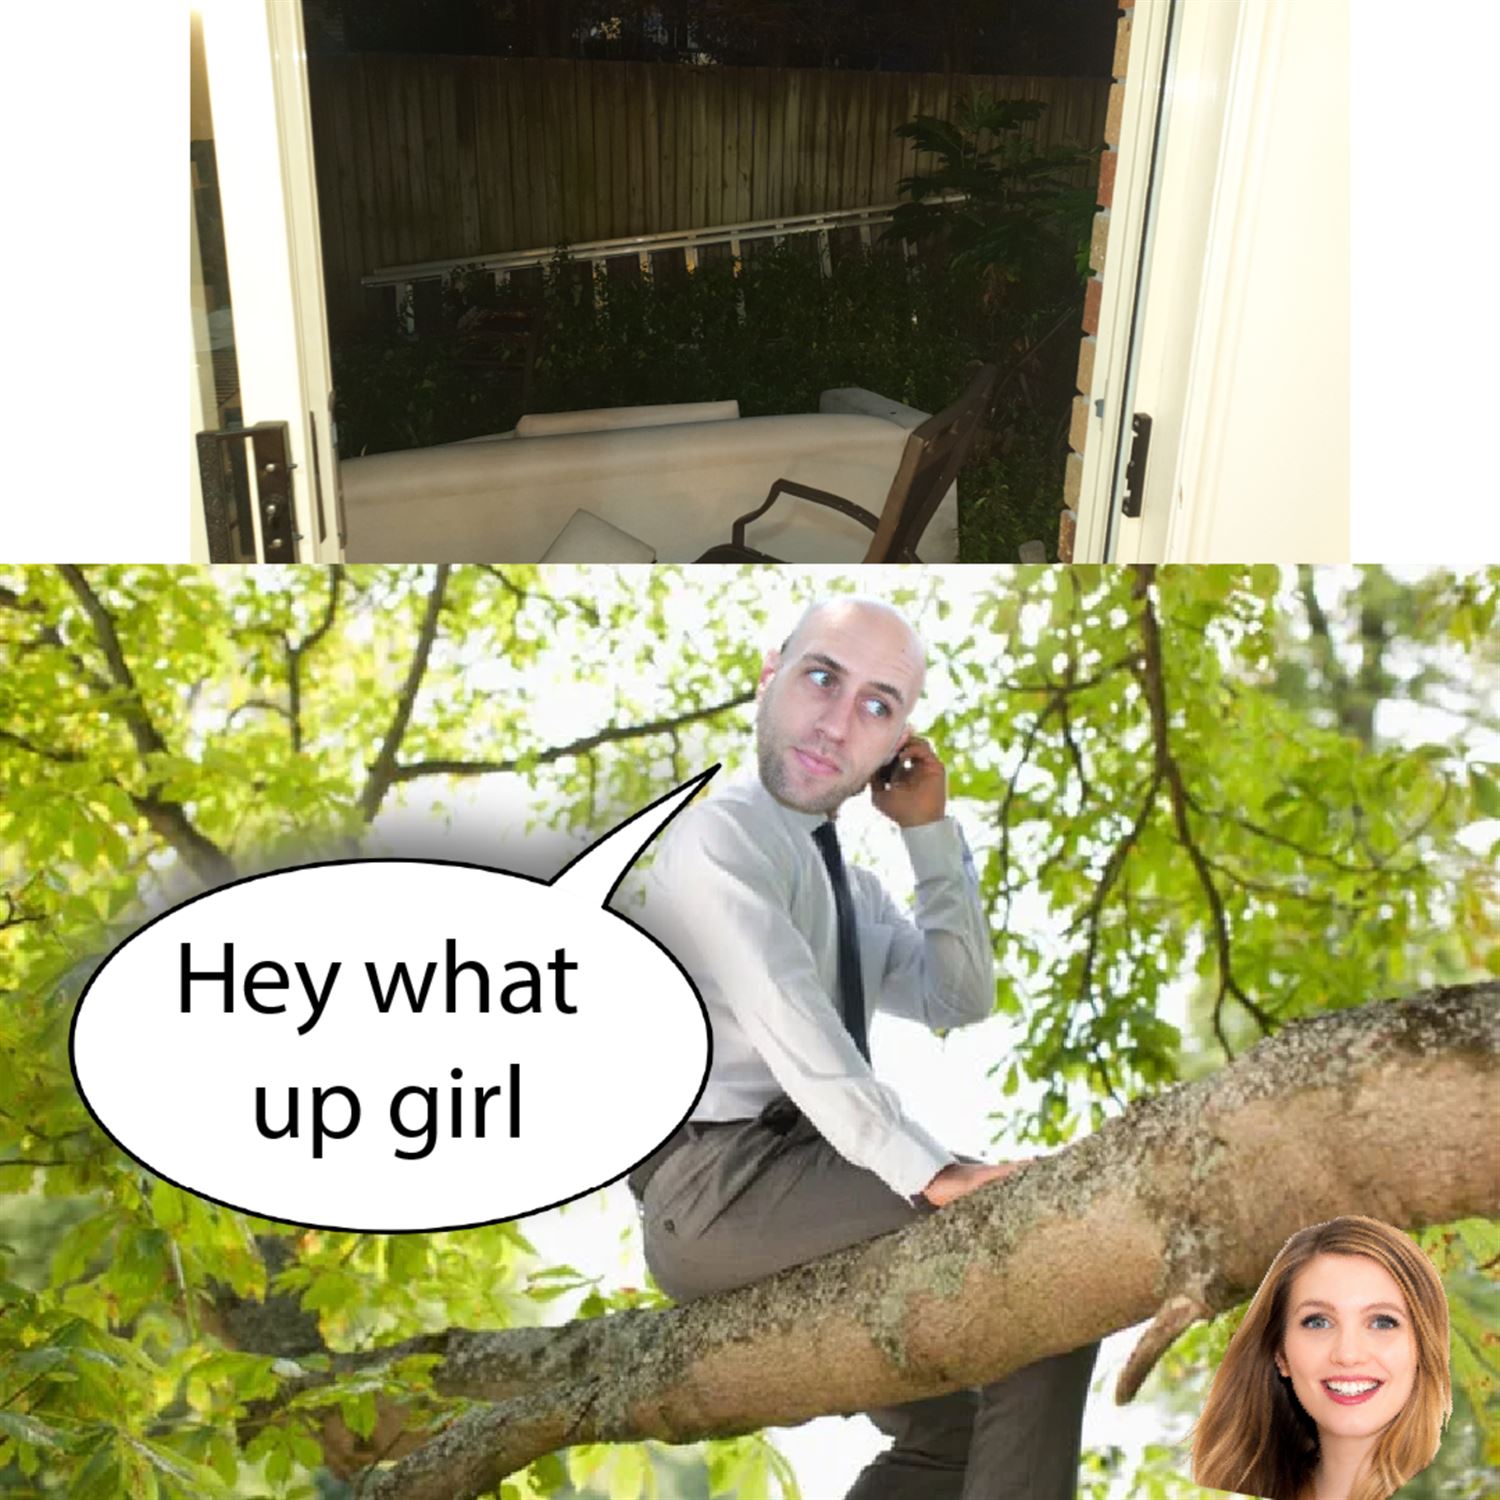 Our jungle backyard and catcalling from trees